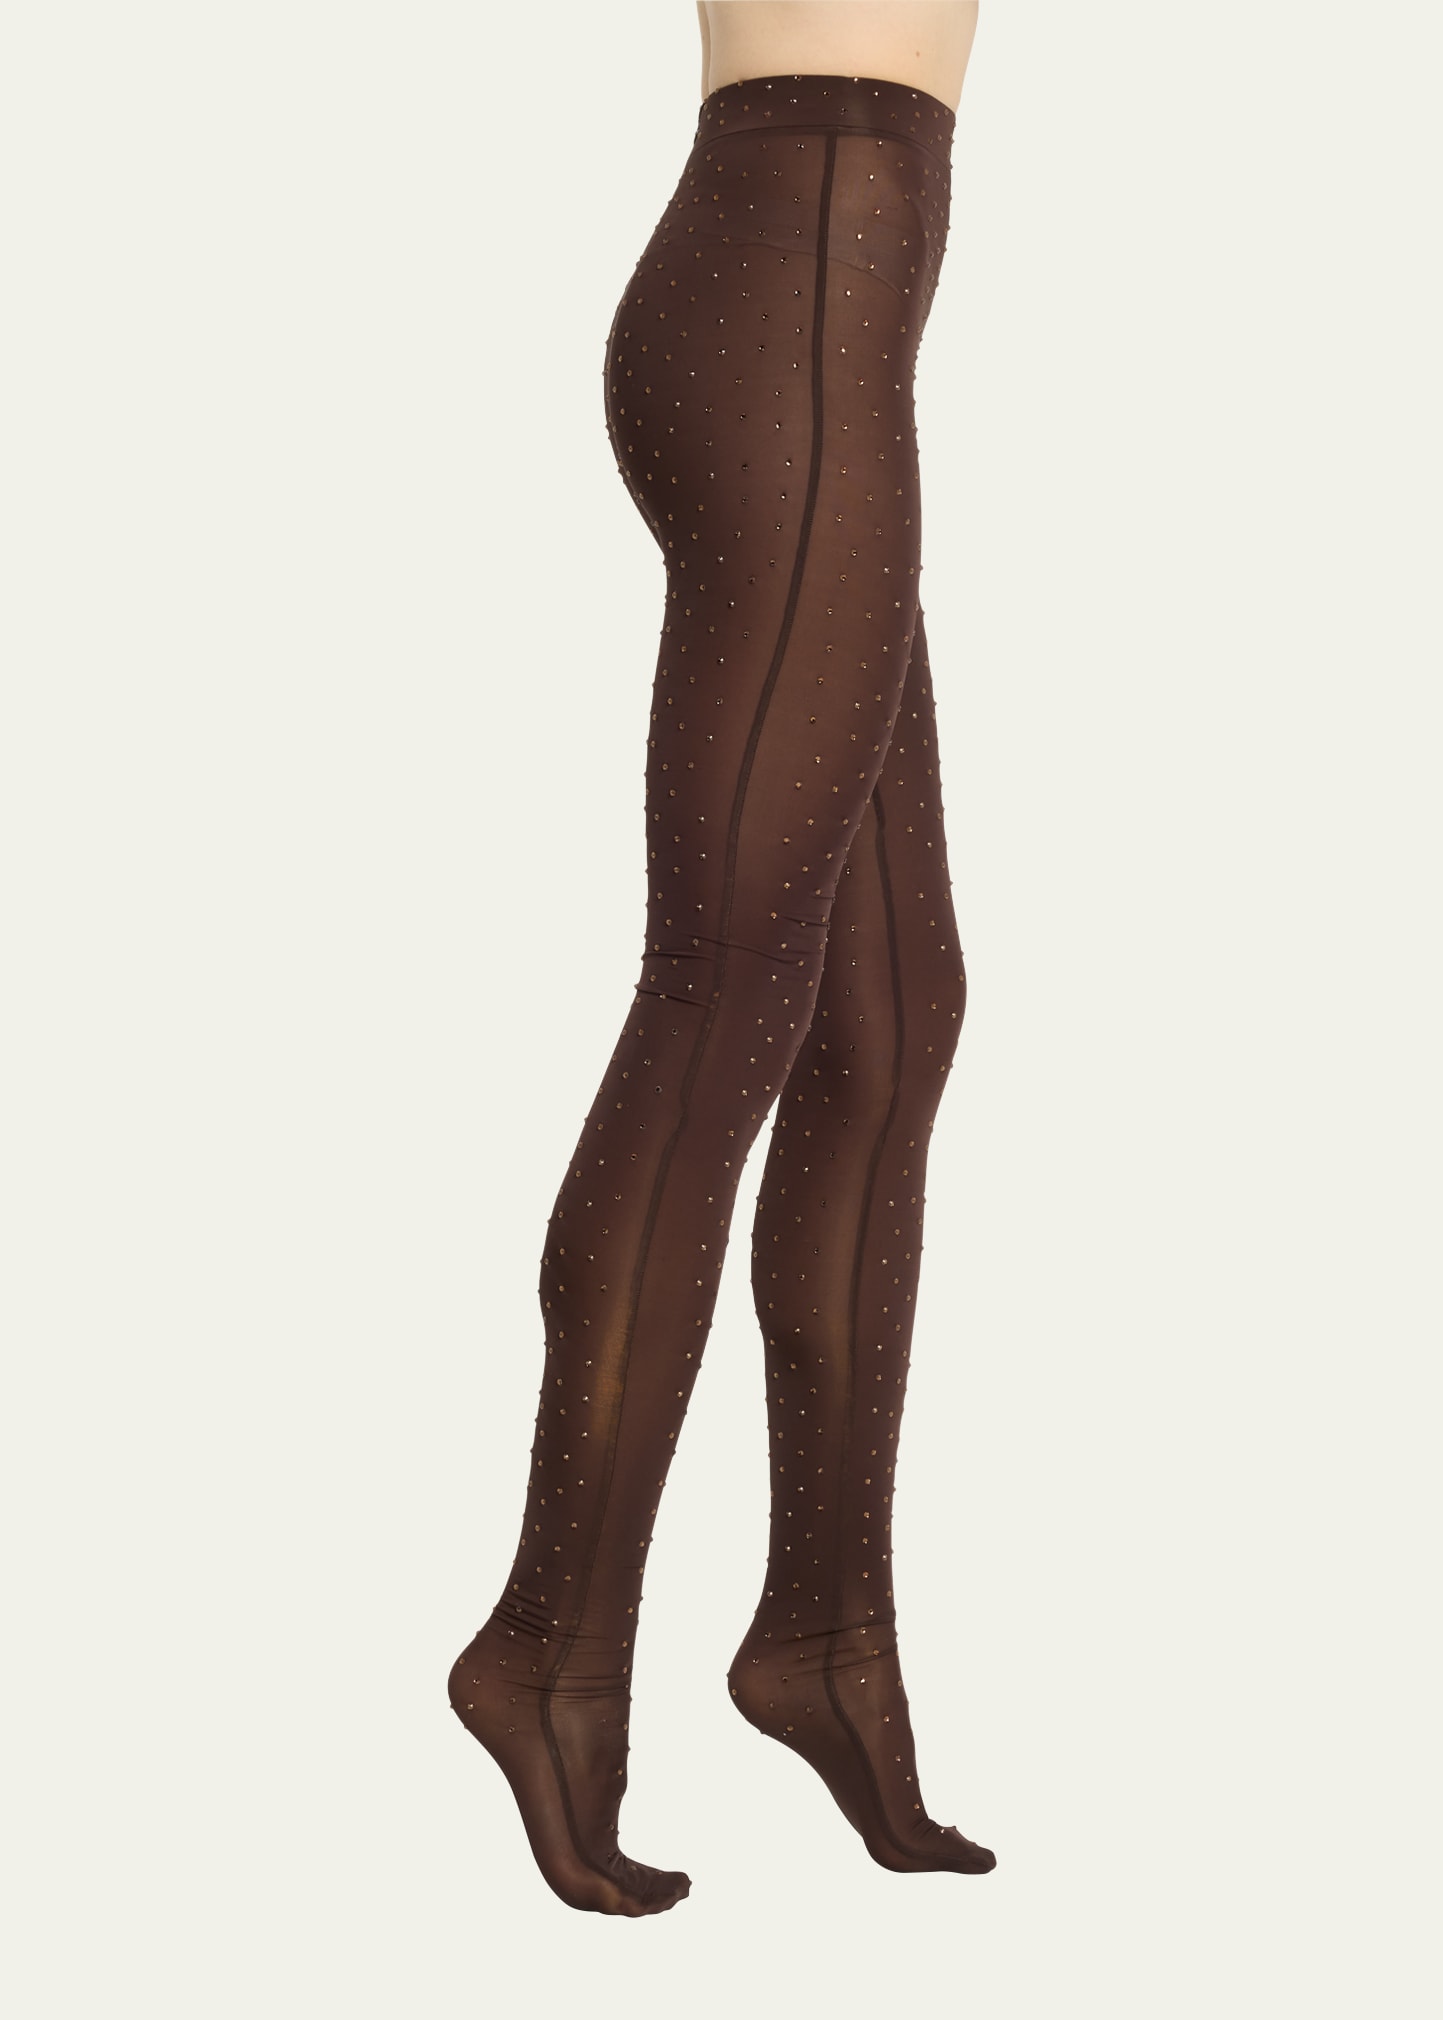 ALEX PERRY Rane crystal-embellished stretch-jersey tights